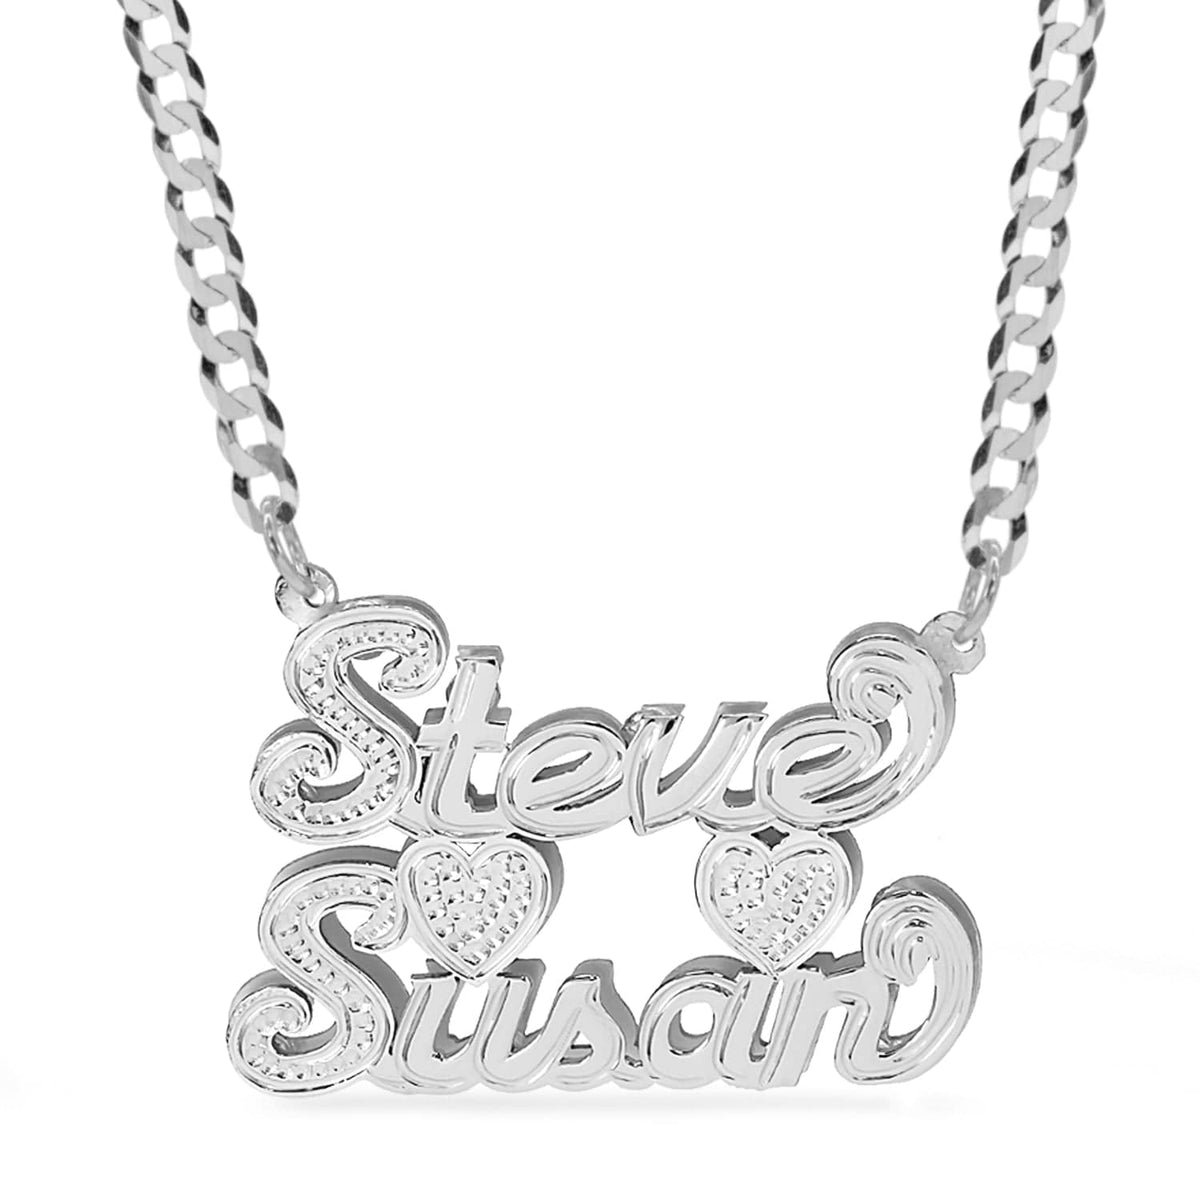 Sterling Silver / Cuban Chain Double Plated Name Necklace - Couples - Best Friends